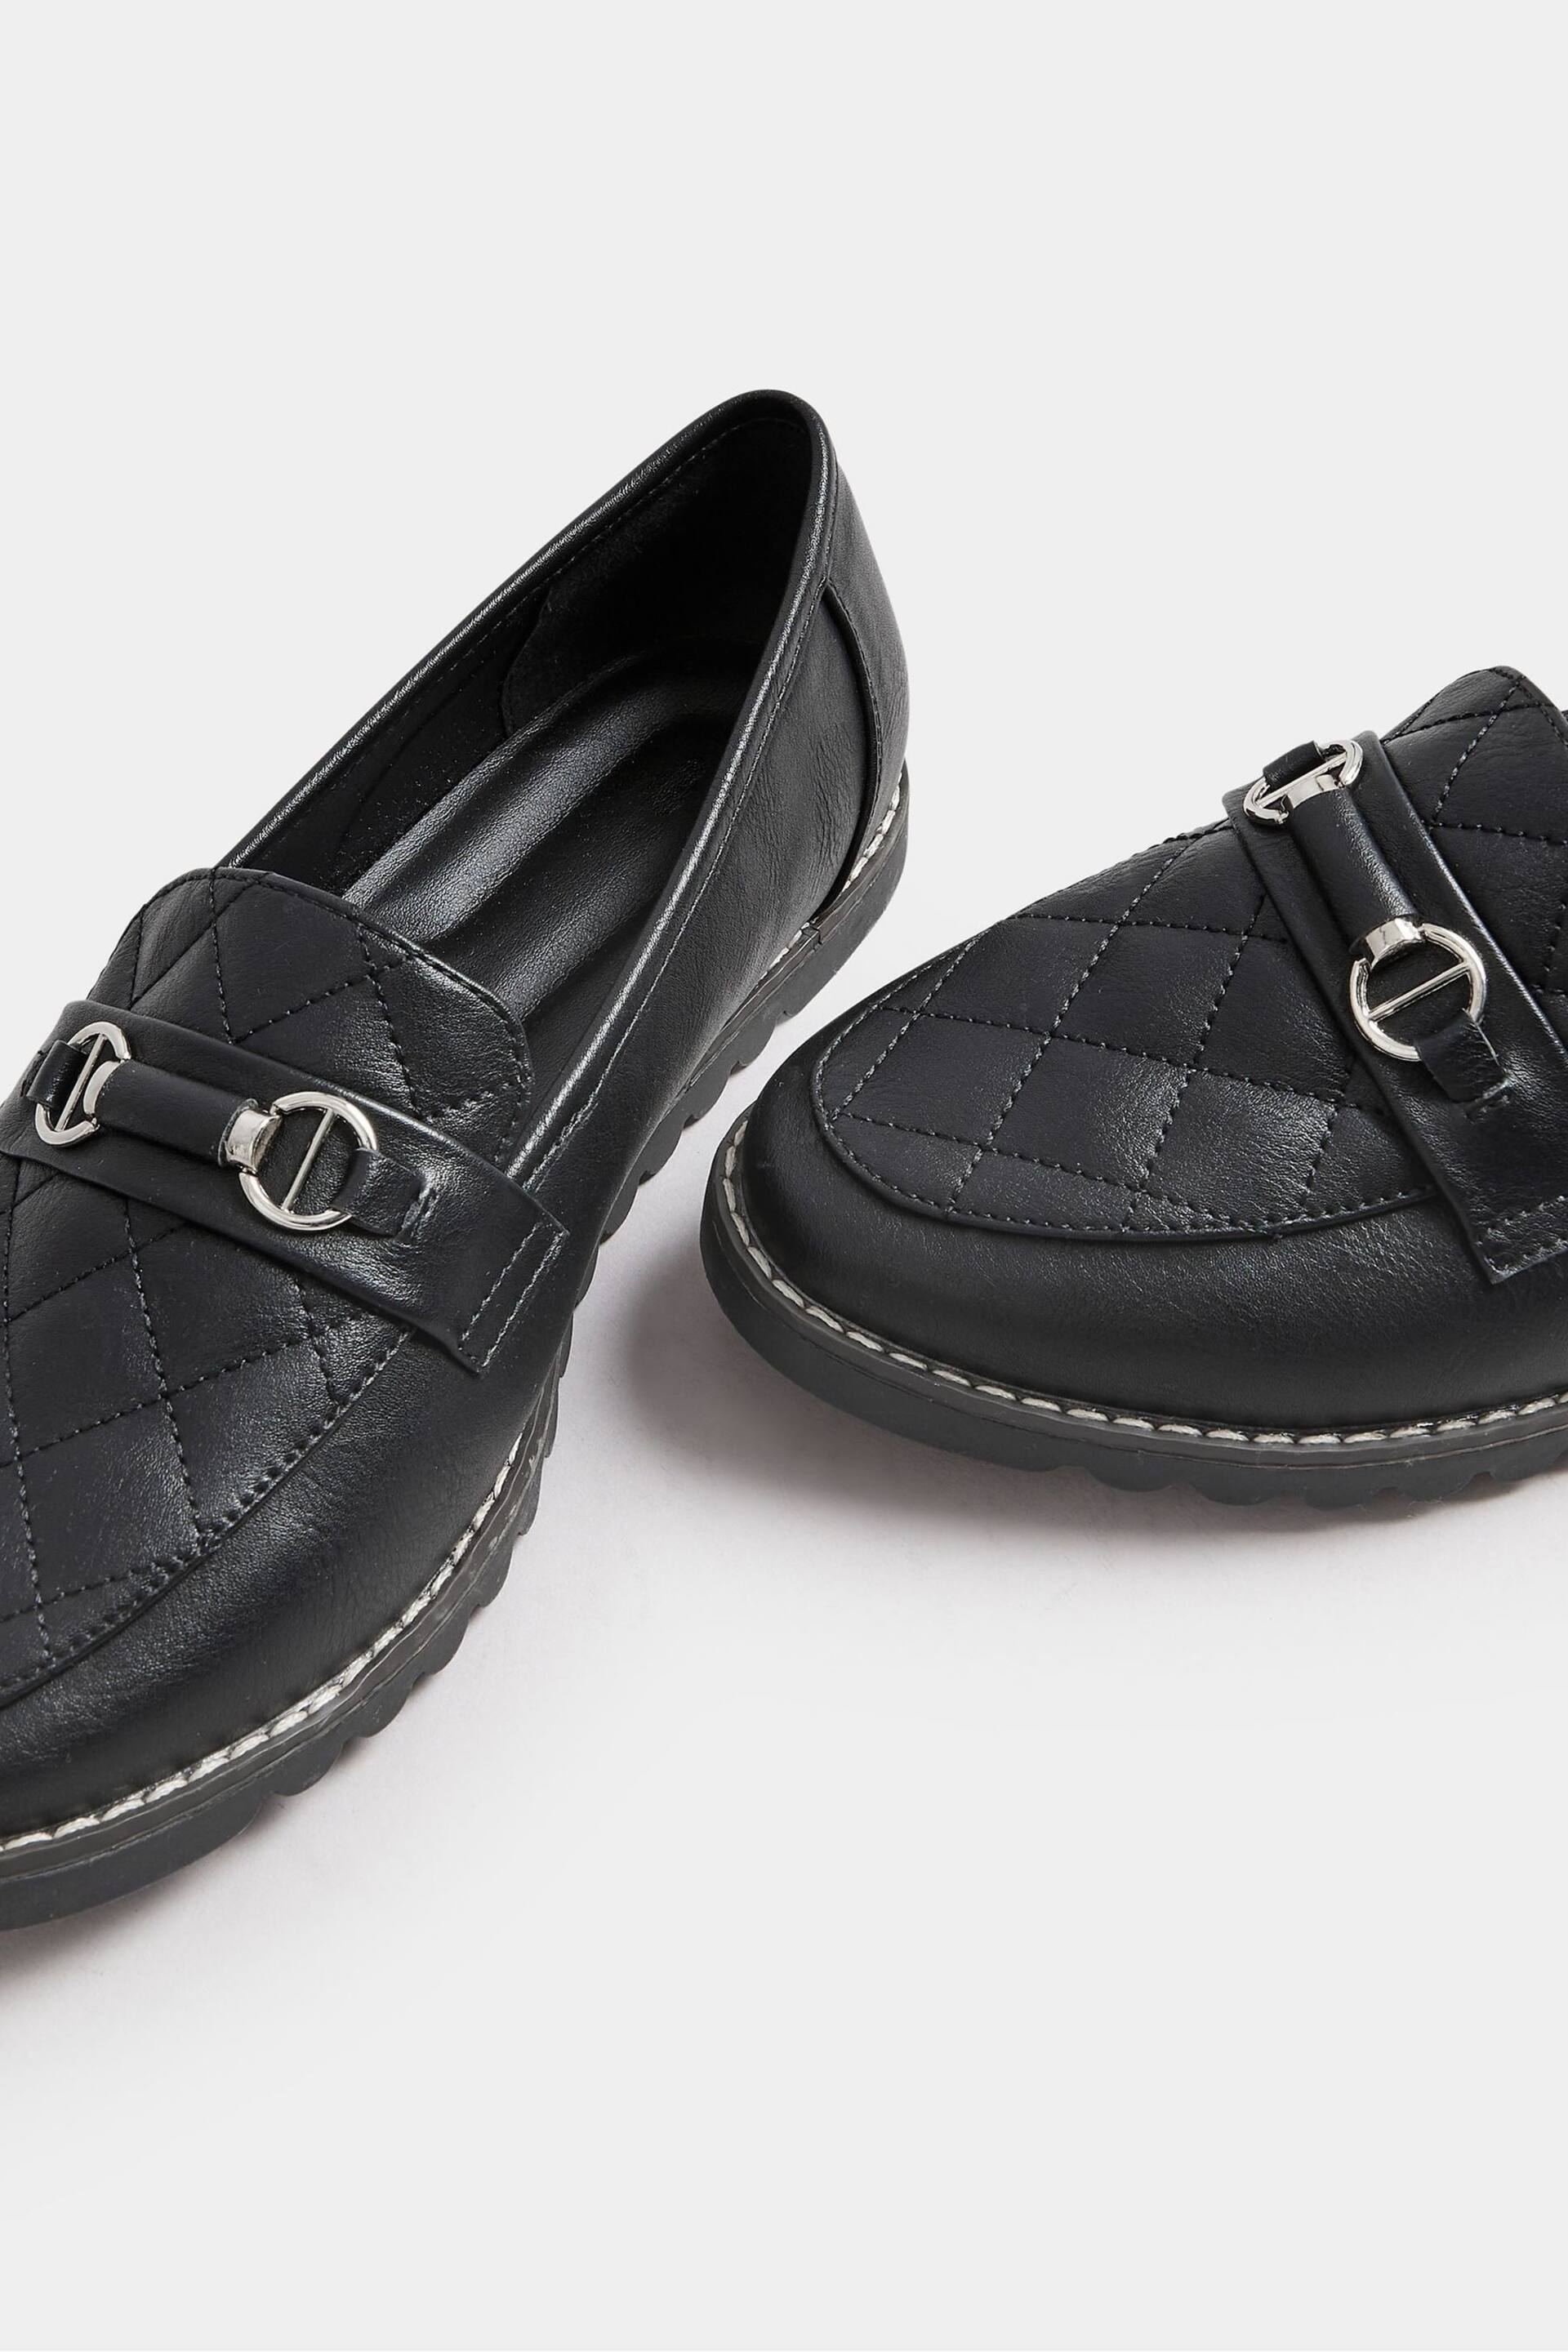 Yours Curve Black Extra Wide Fit Quilted Loafers - Image 5 of 5